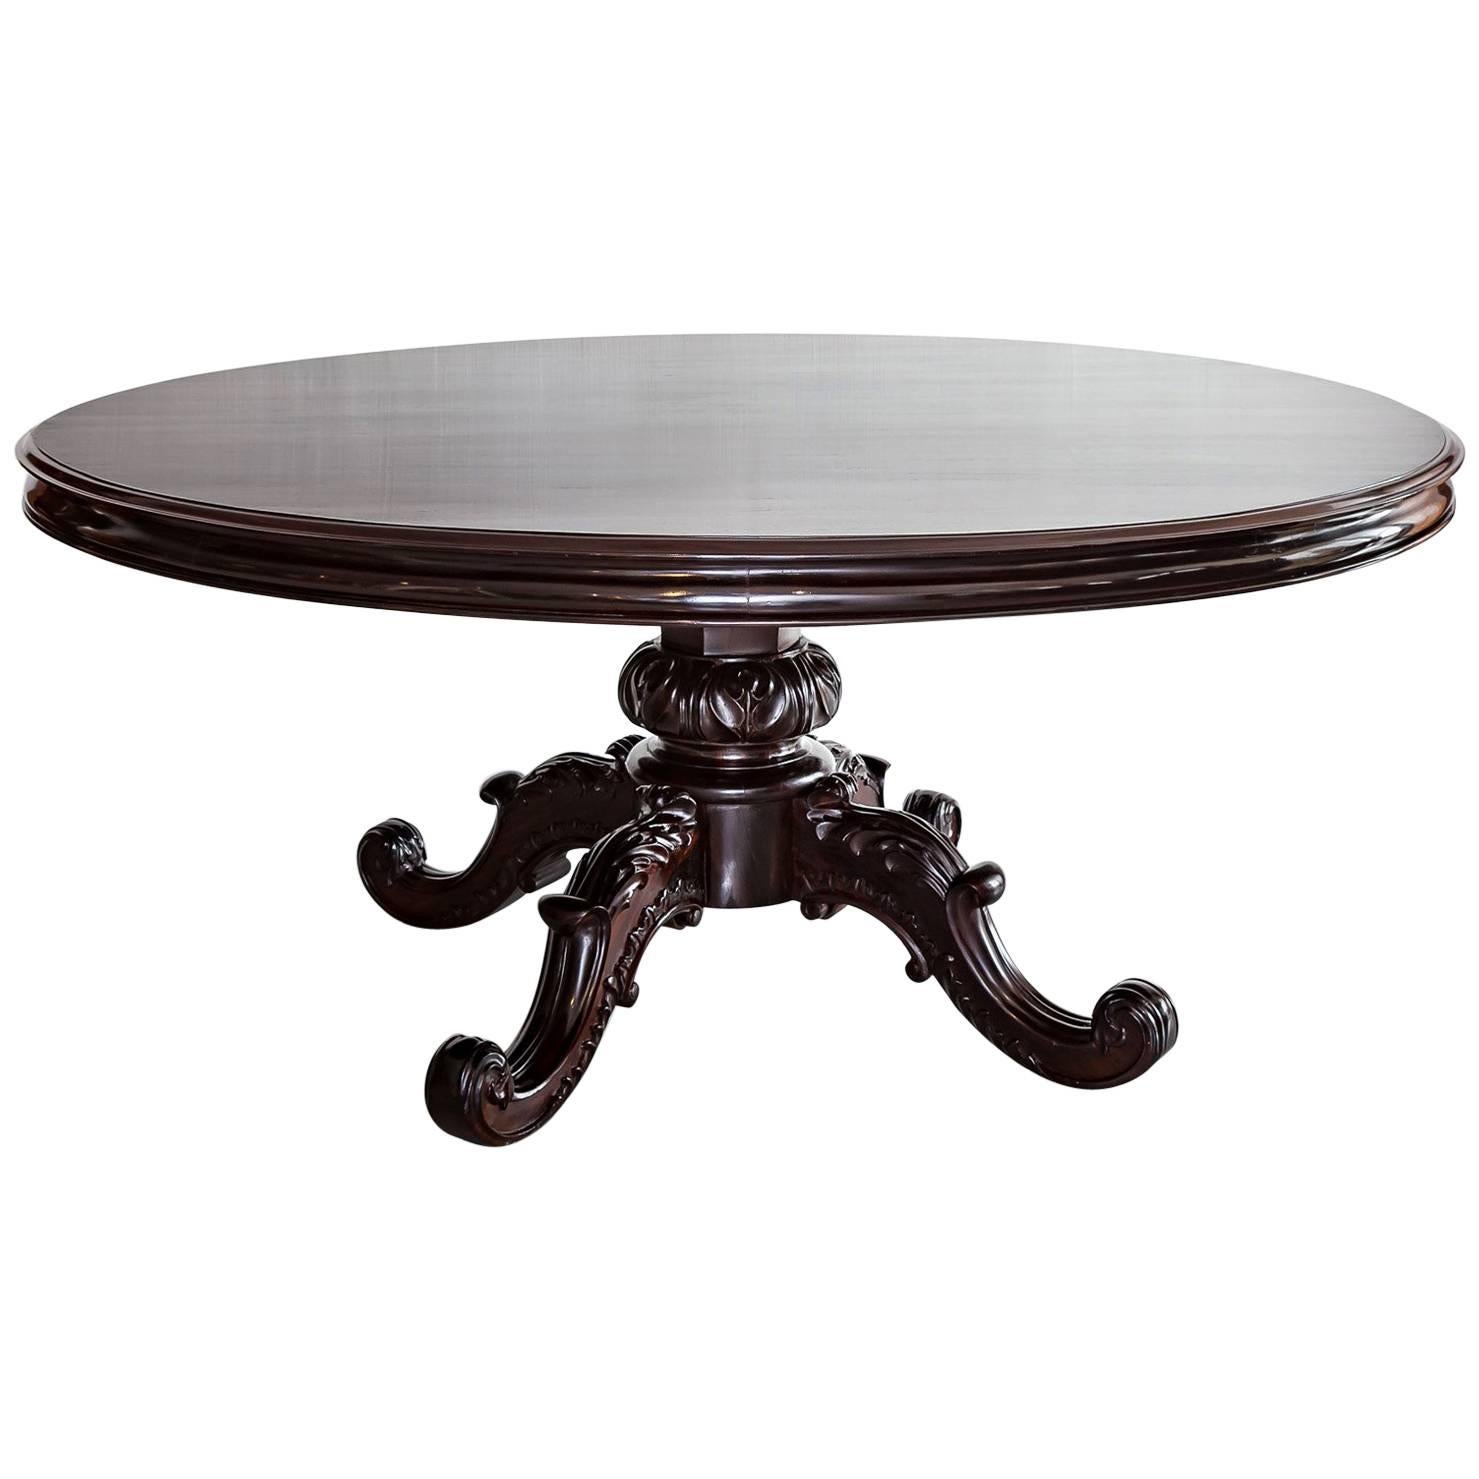 Antique Anglo-Indian or British Colonial Rosewood Round Dining Table For Sale